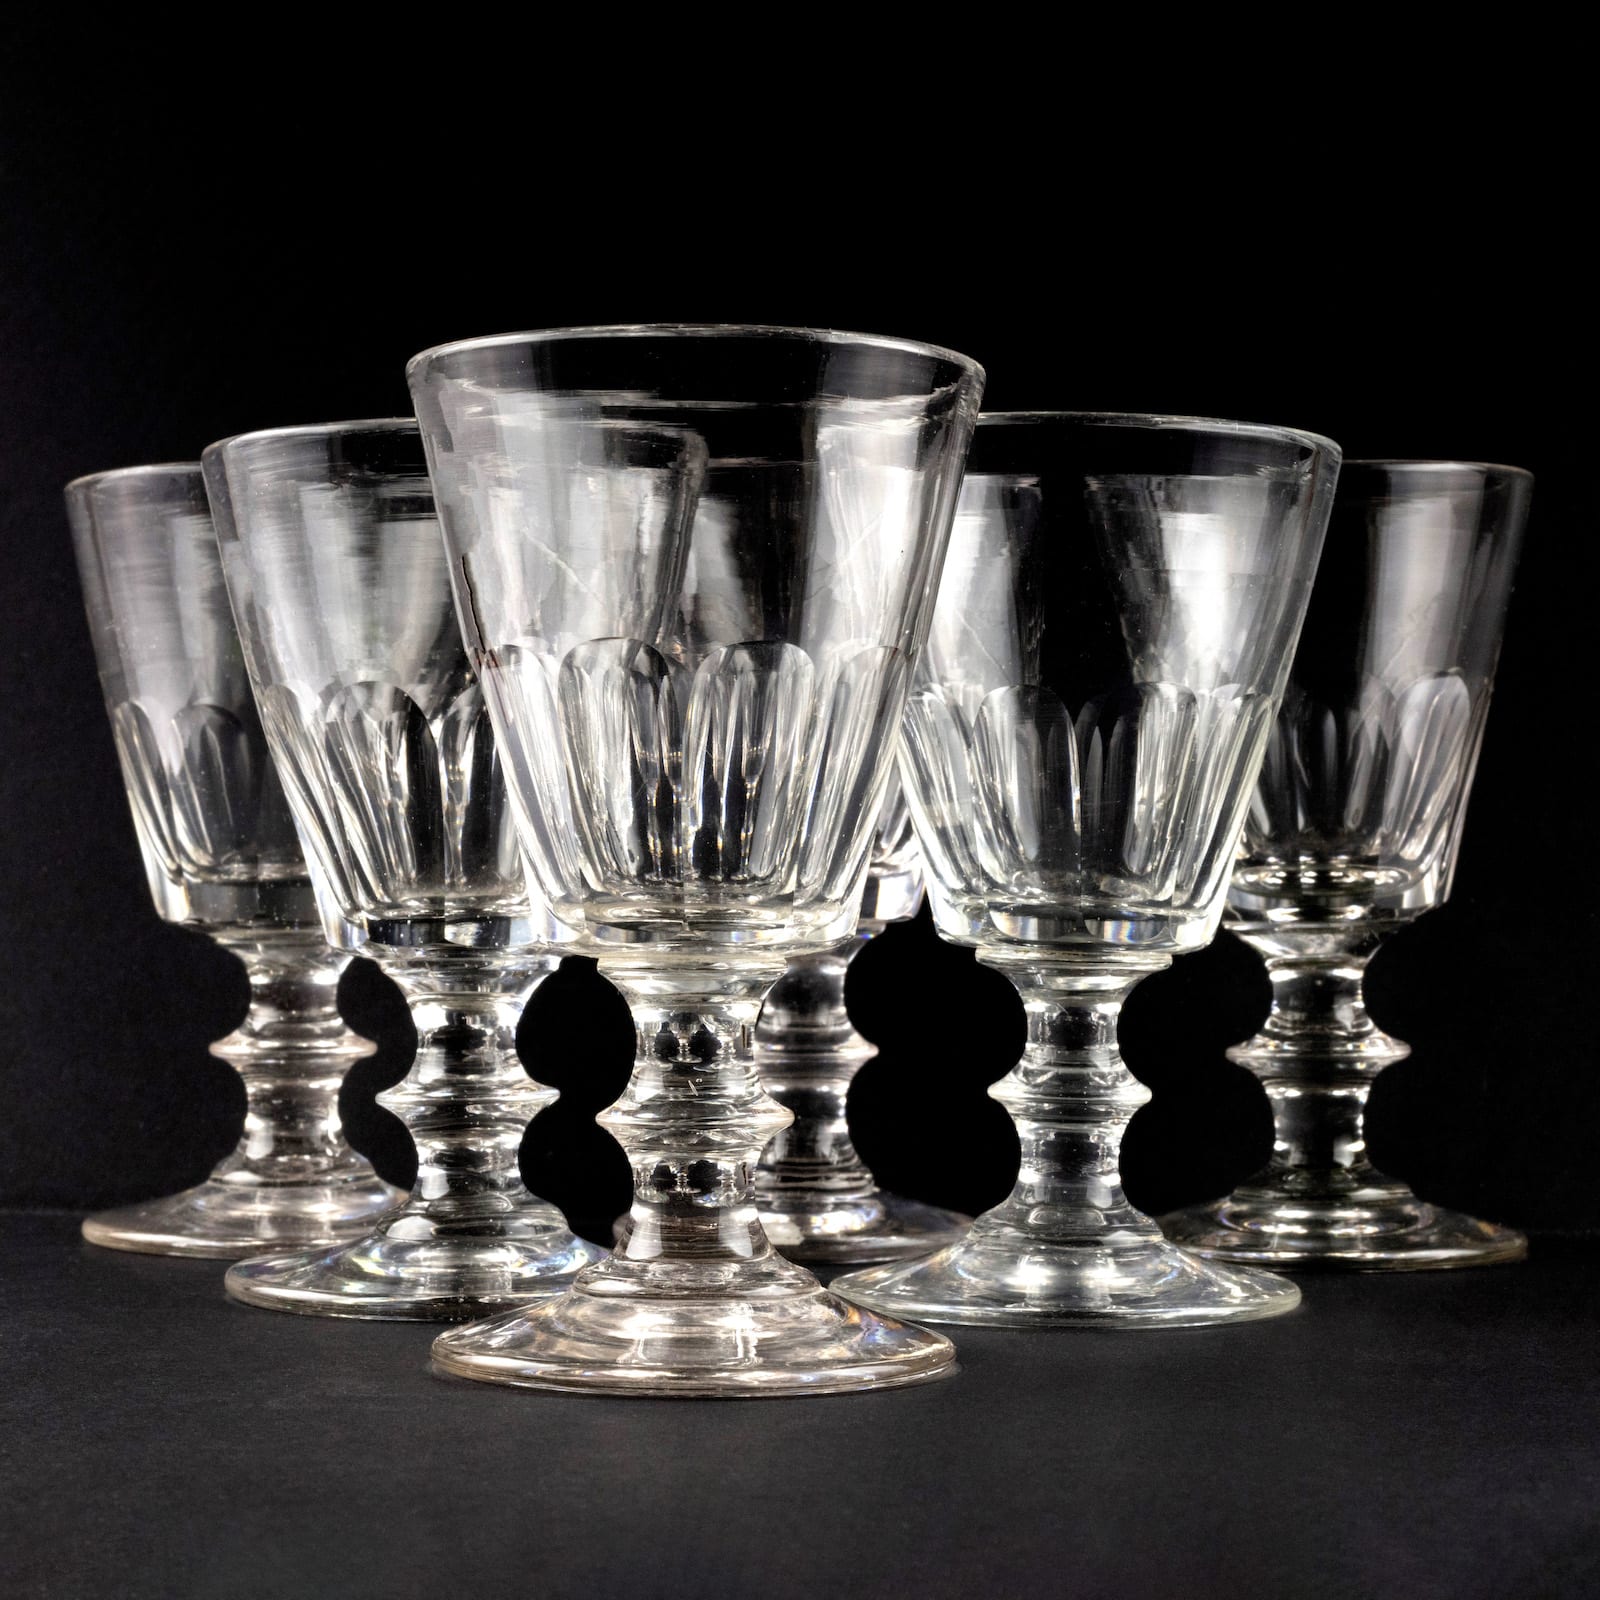 Set Of 6 Aperitif Glasses C1880 Green And Stone Shop